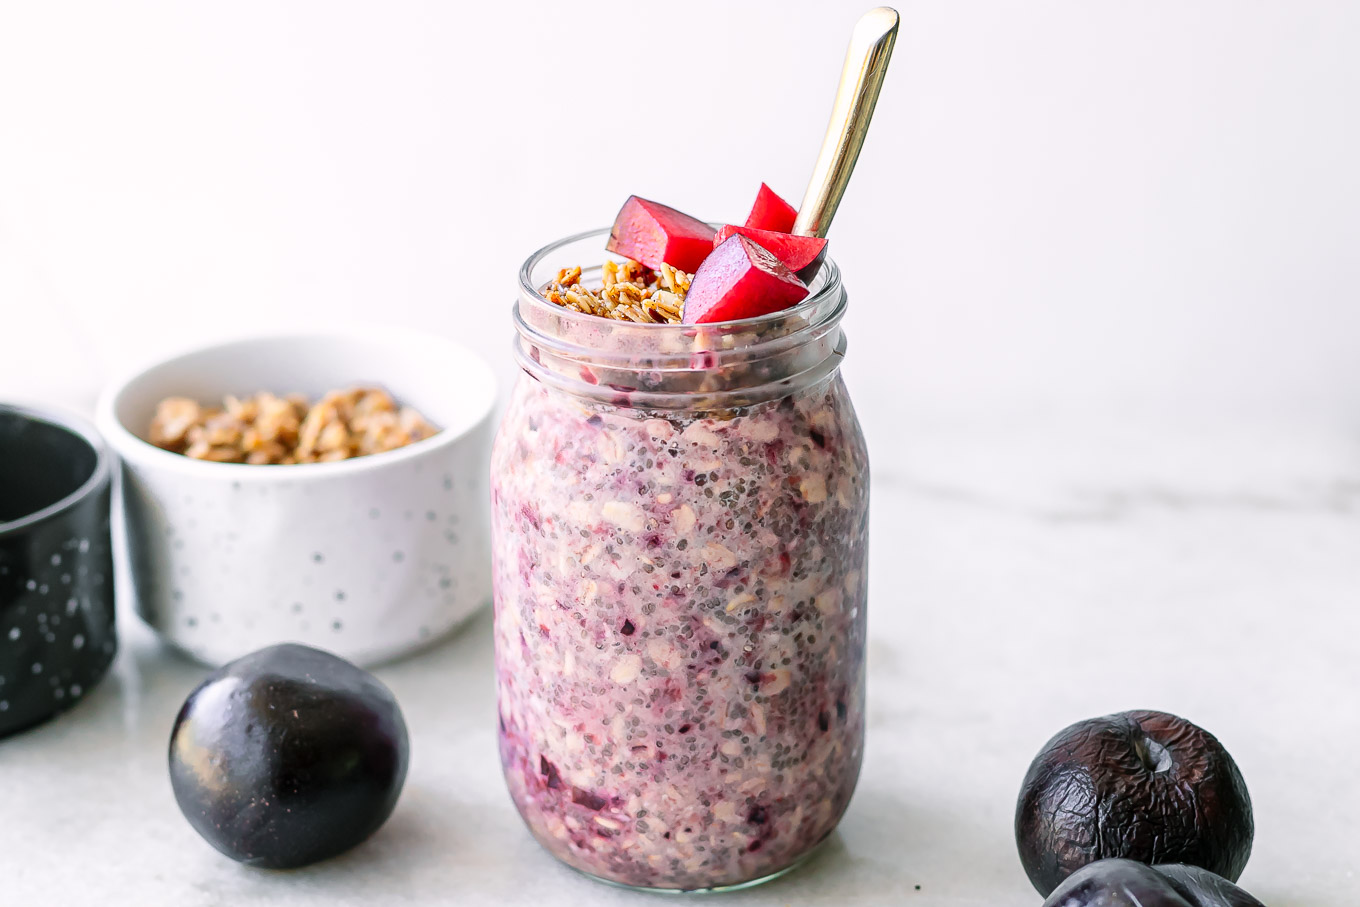 purple plum overnight oats in a jar with granola and cut plums as garnish on a white table